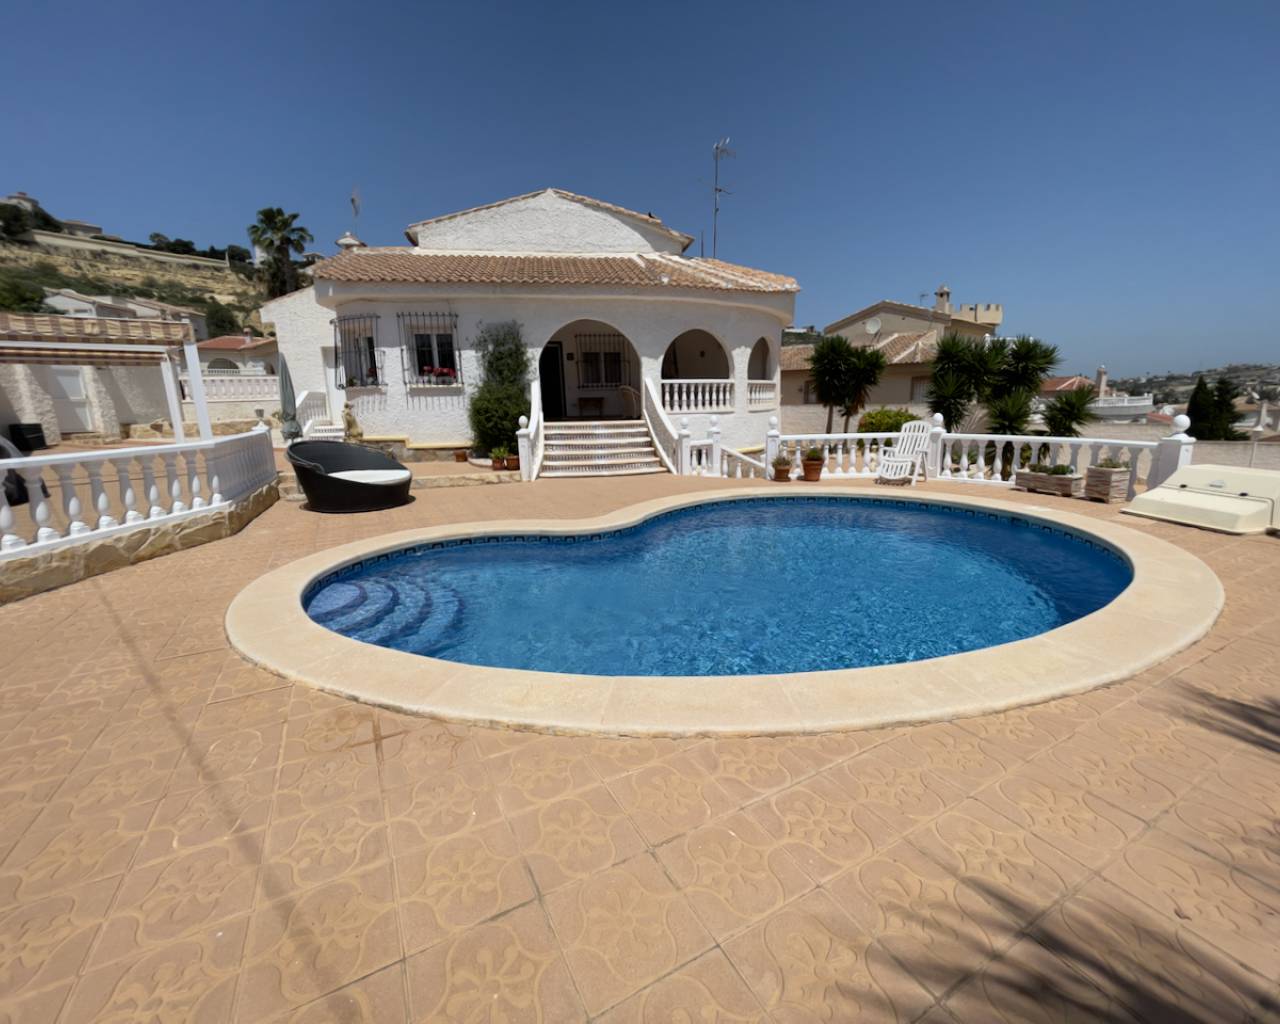 For sale: 4 bedroom house / villa in Rojales